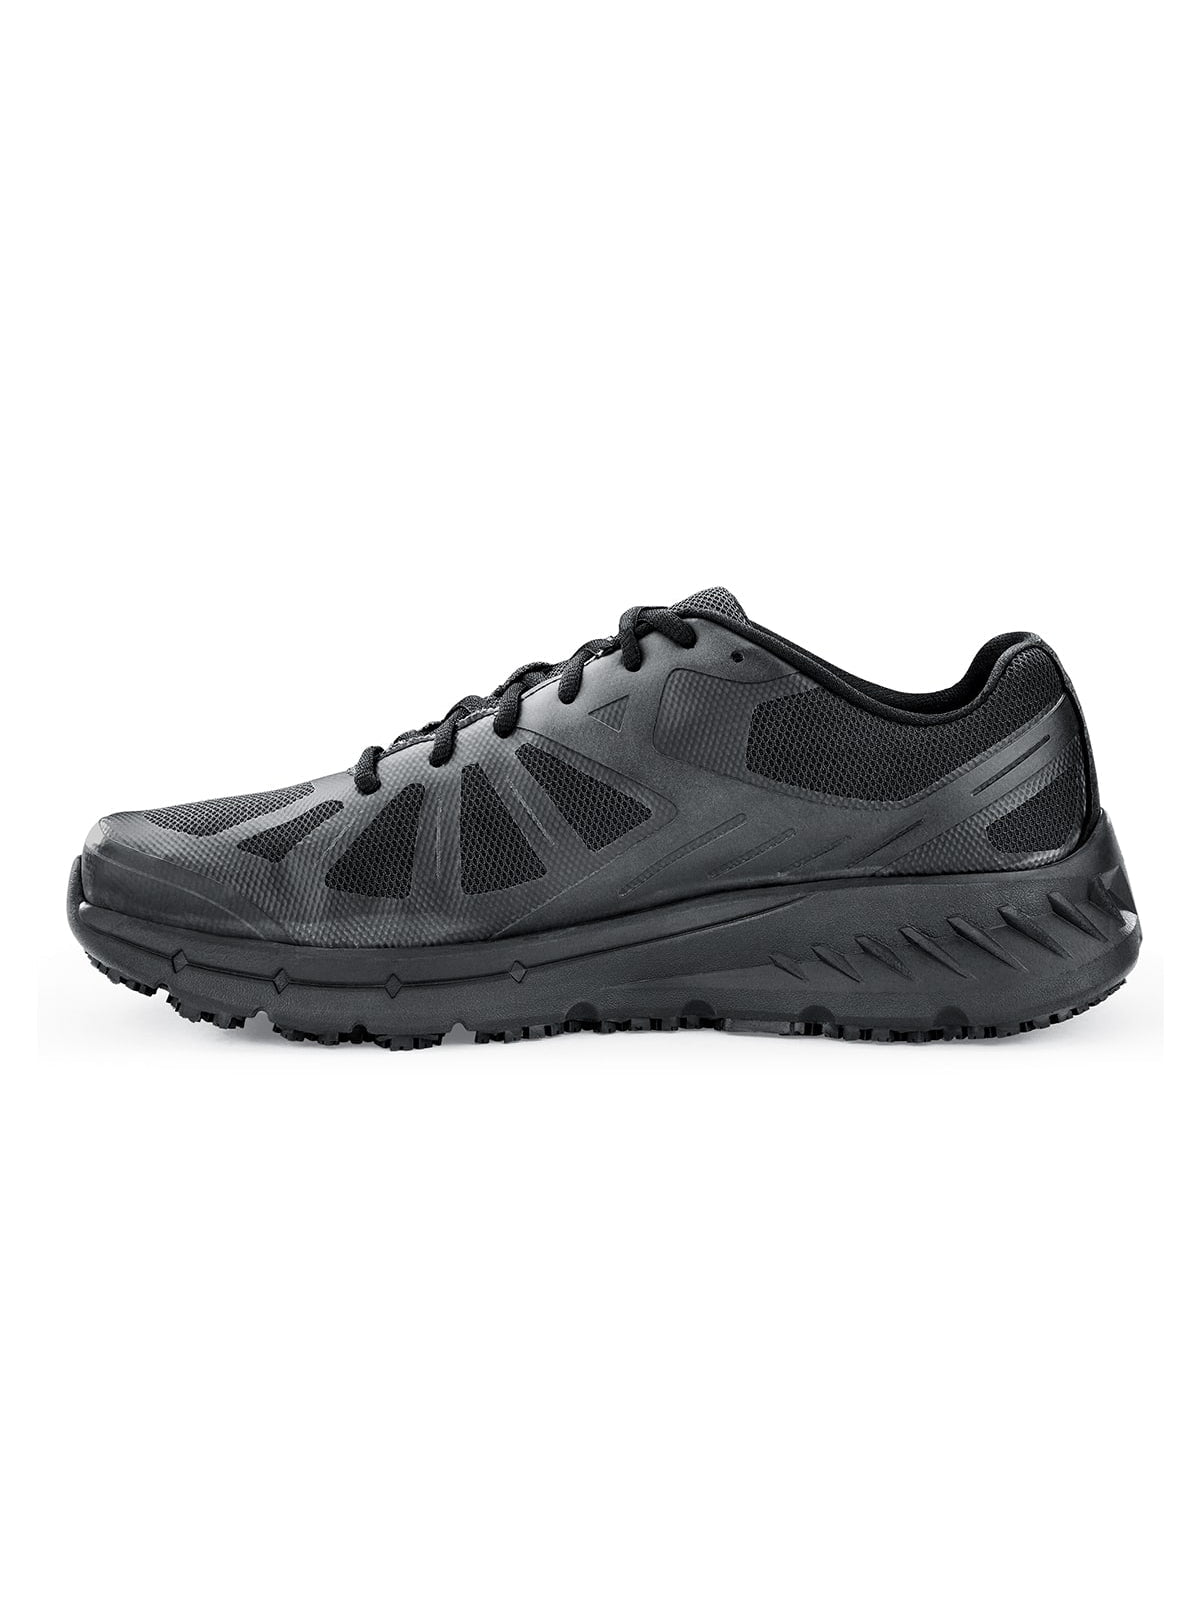 Men's Work Shoe Endurance II by Shoes For Crews -  ChefsCotton